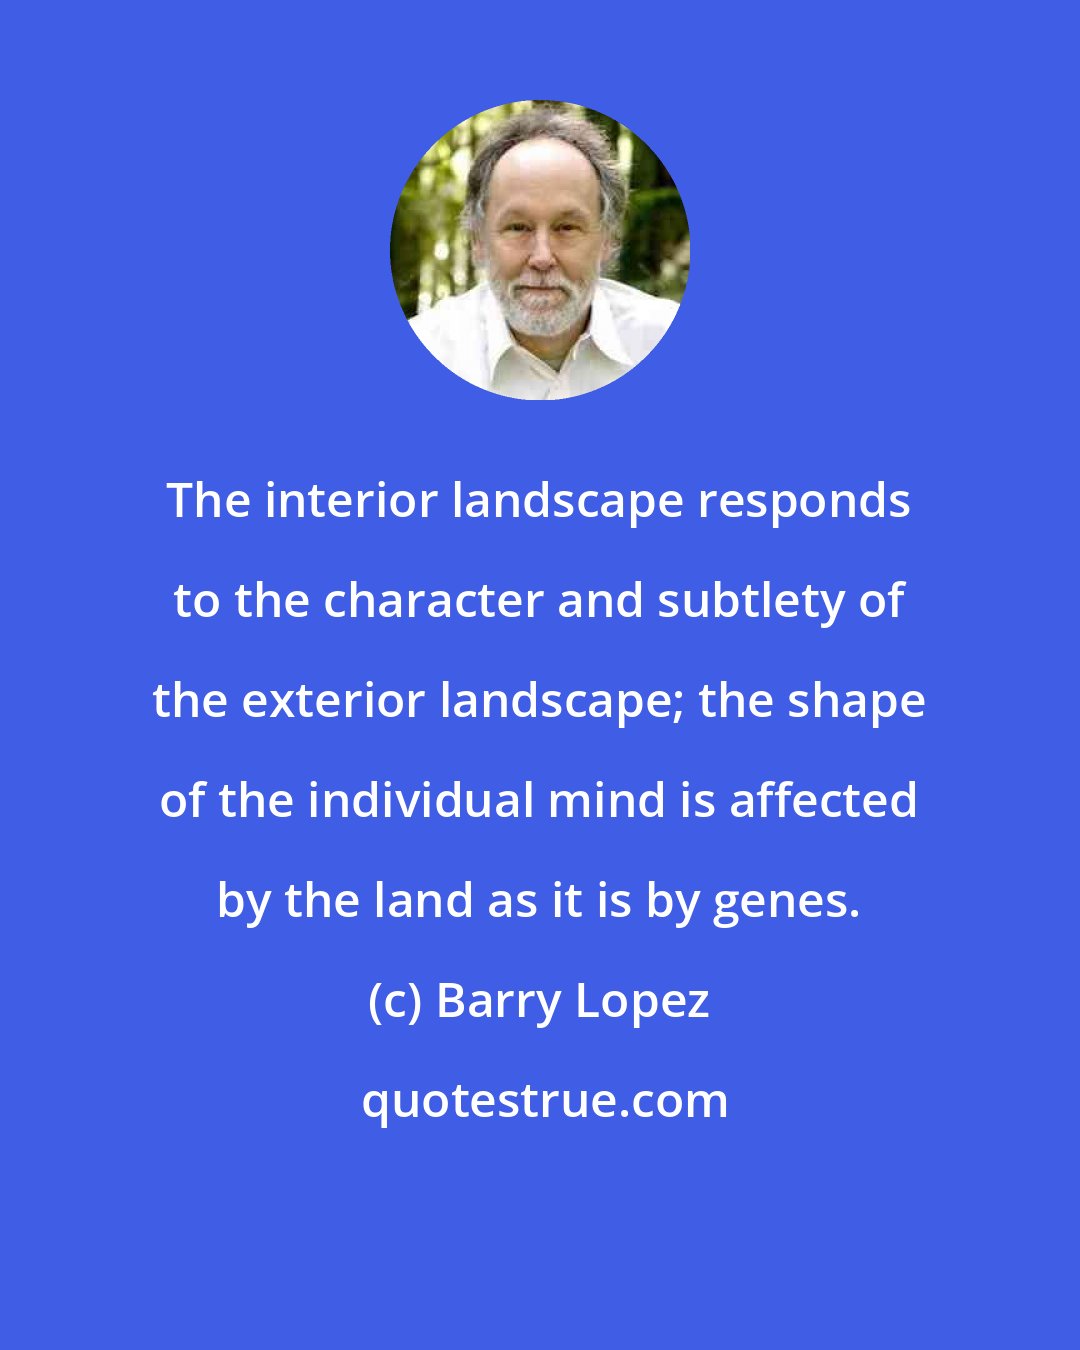 Barry Lopez: The interior landscape responds to the character and subtlety of the exterior landscape; the shape of the individual mind is affected by the land as it is by genes.